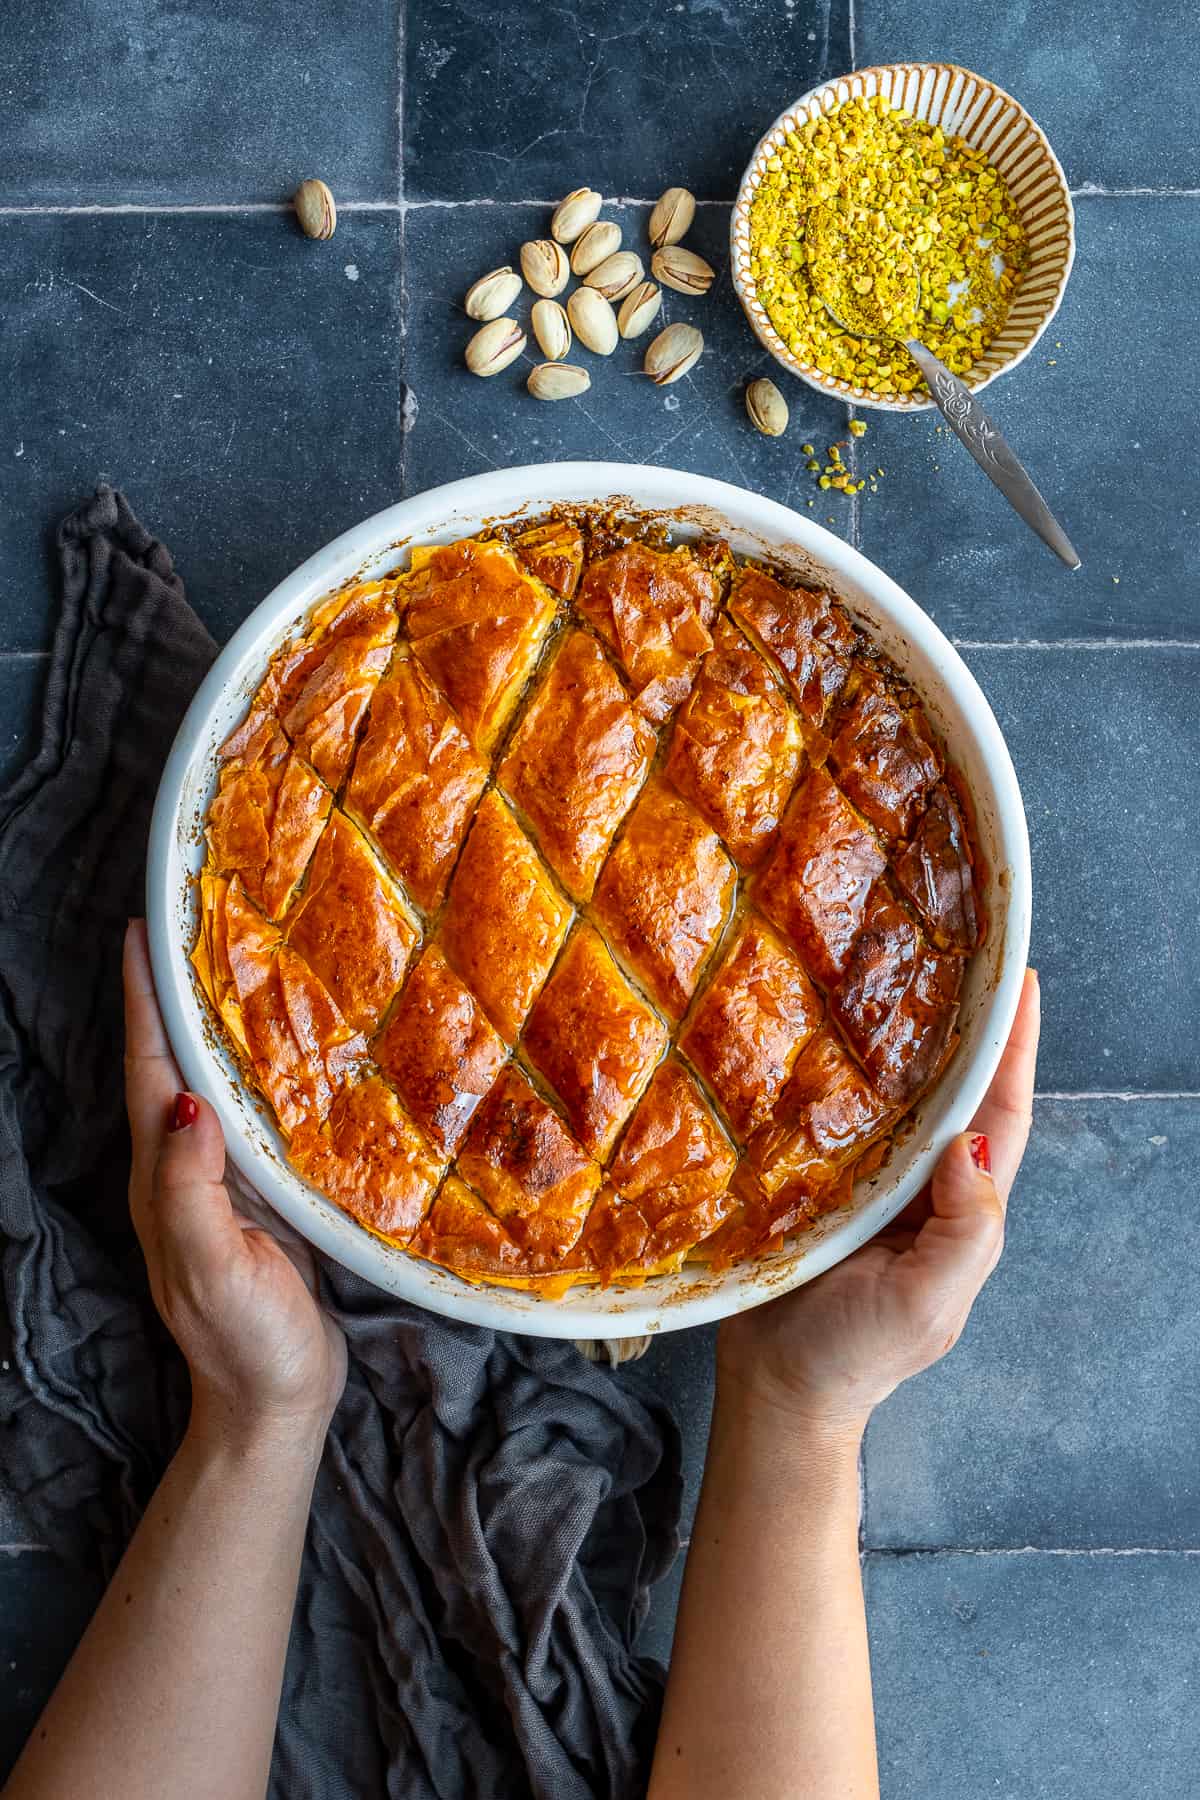 Hands holding baklava dessert in a round baking pan, pistachios and ground pistachio on the side.